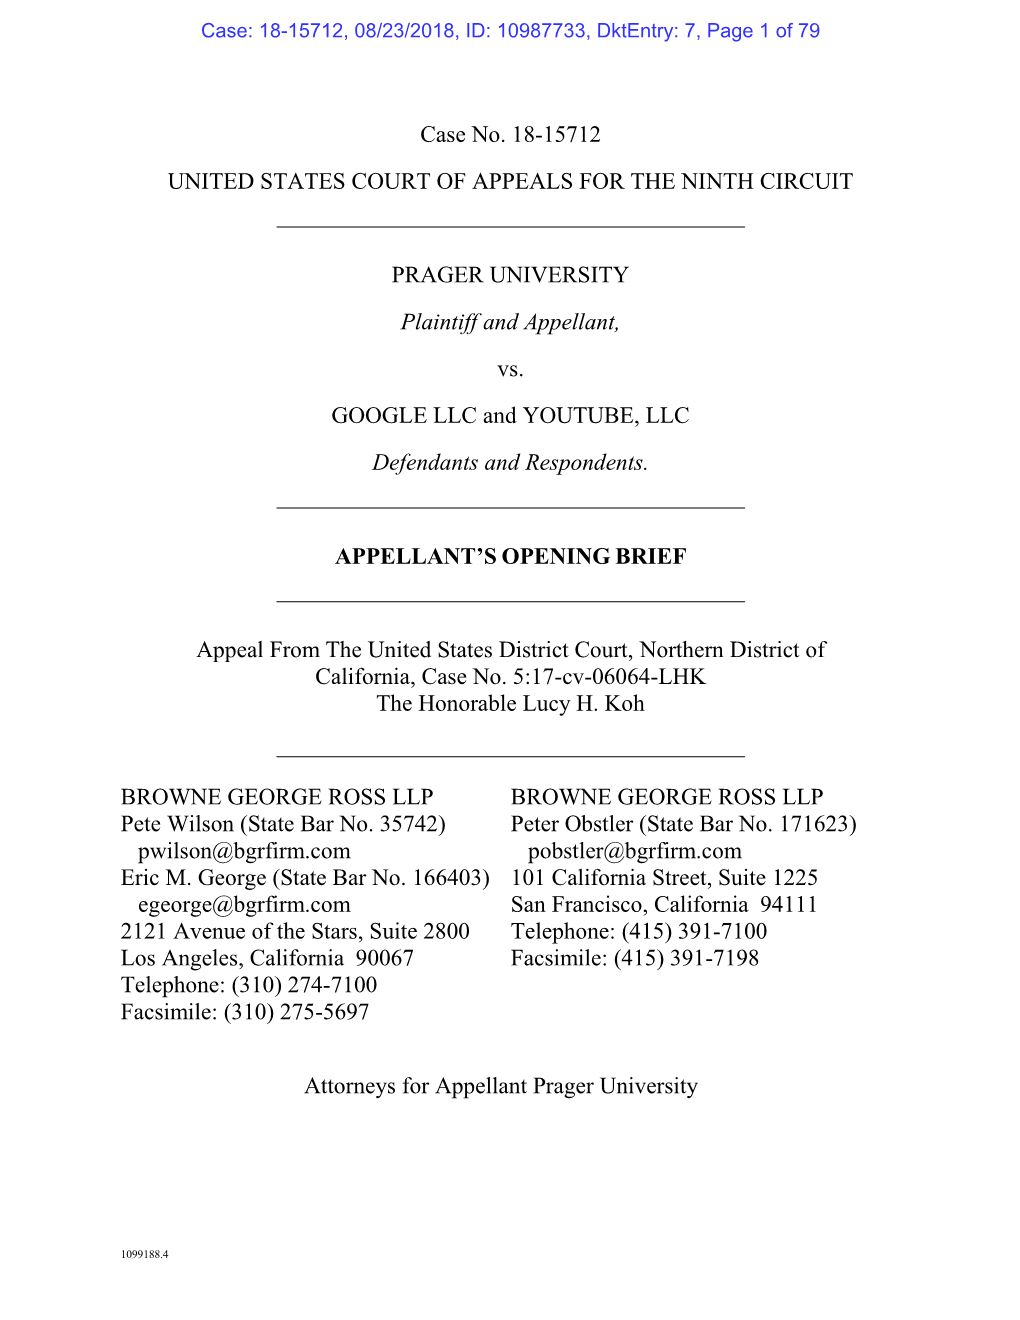 Case No. 18-15712 UNITED STATES COURT of APPEALS for THE